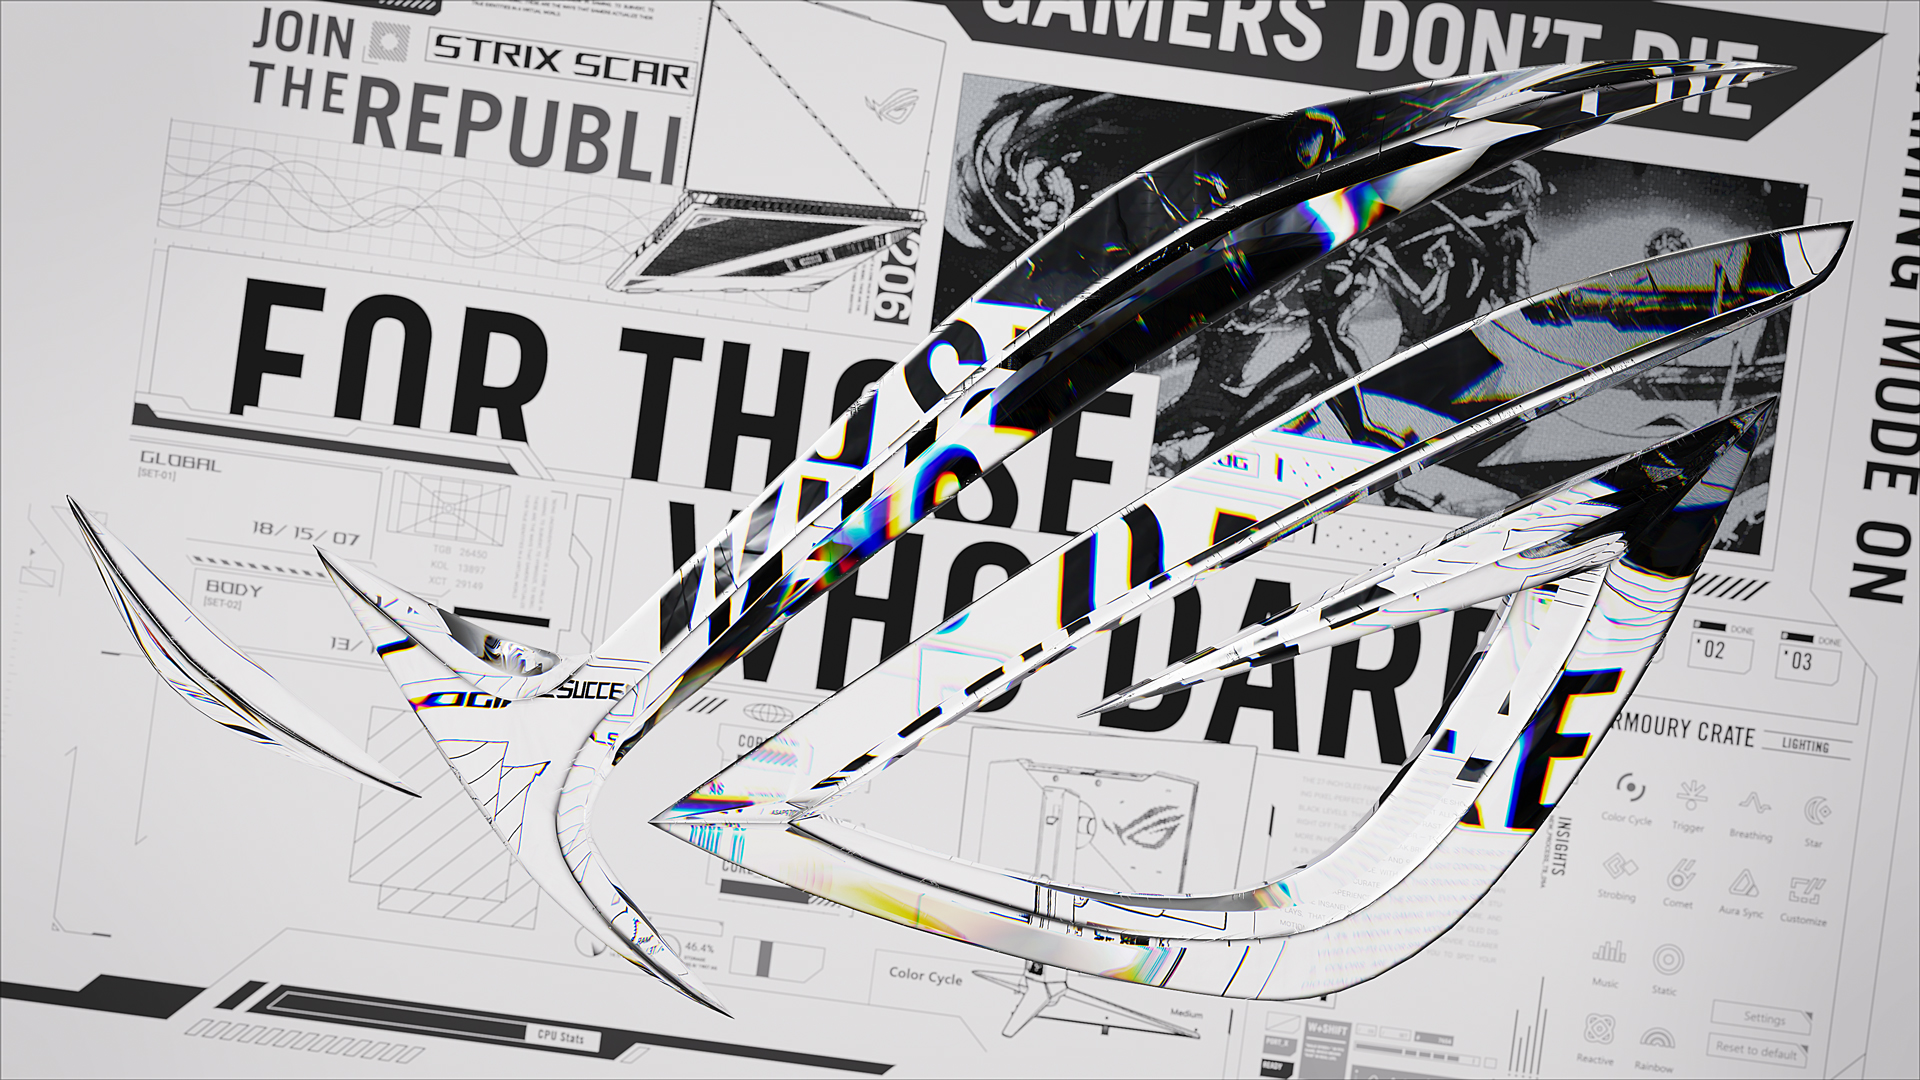 General 1920x1080 Republic of Gamers logo typography abstract